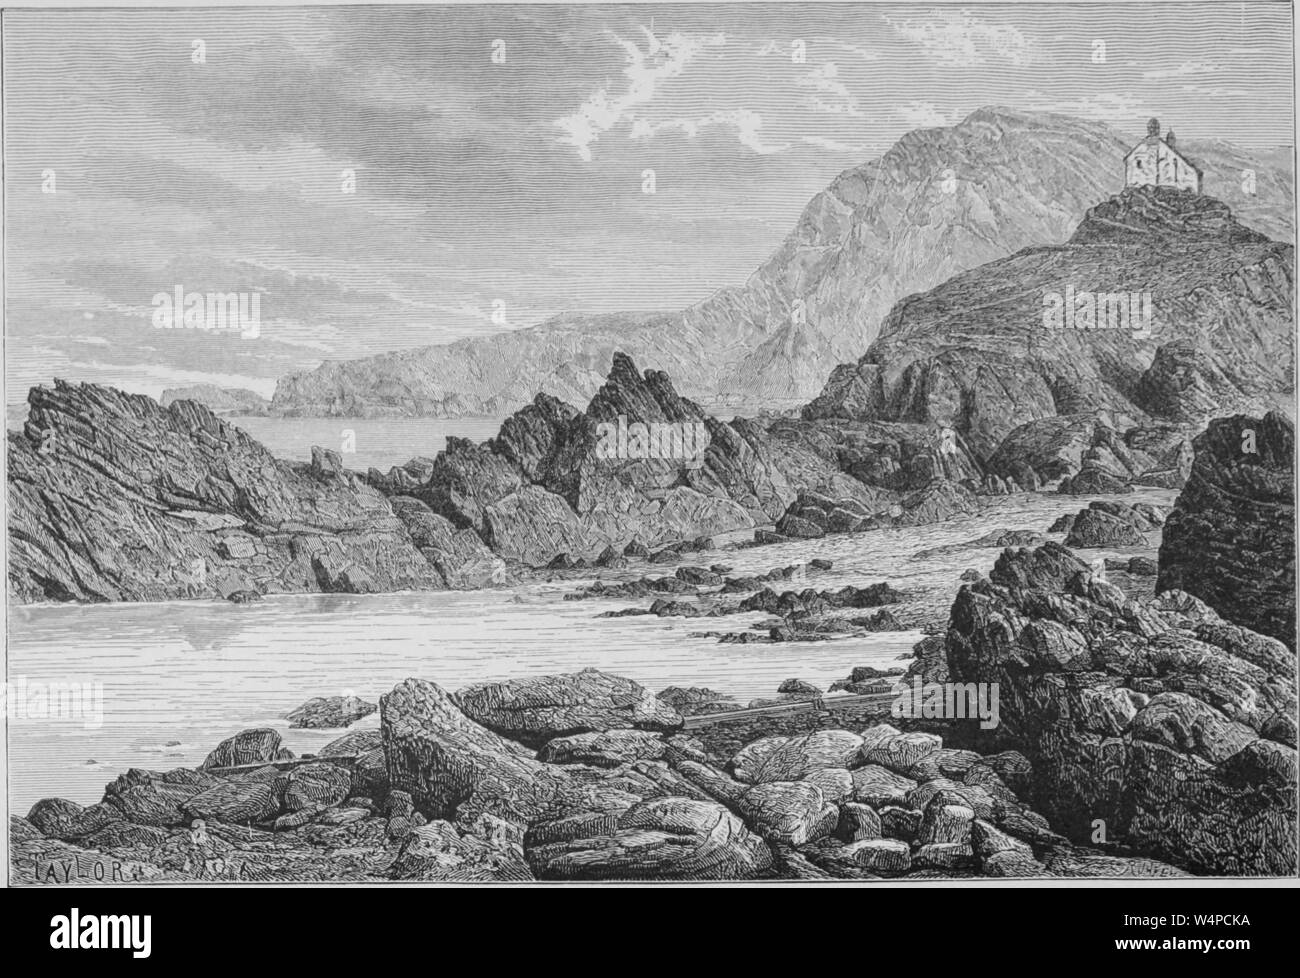 Engraving of the rocks at Ilfracombe, Devon, England, from the book 'The earth and its inhabitants' by Elisee Reclus, 1881. Courtesy Internet Archive. () Stock Photo